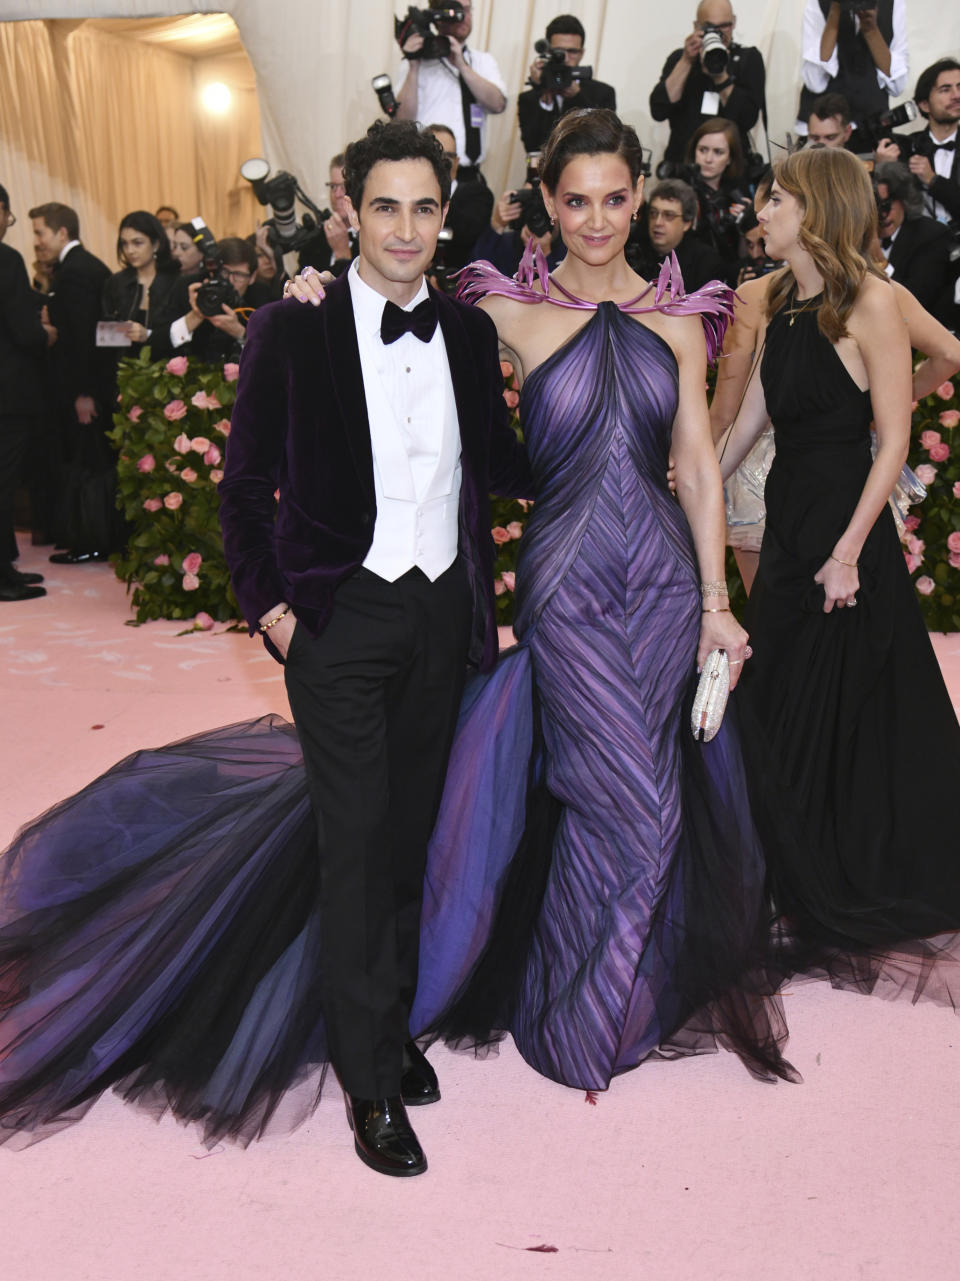 FILE - In this May 6, 2019, file photo, designer Zac Posen, left, and Katie Holmes attend The Metropolitan Museum of Art's Costume Institute benefit gala celebrating the opening of the "Camp: Notes on Fashion" exhibition in New York. Posen is shutting down his namesake label. Posen has been a red carpet favorite for close to two decades. He’s known for glamorous, body-hugging gowns, often with long trains or big, flamboyant ruffles, for stars like Holmes and Rihanna. (Photo by Charles Sykes/Invision/AP, File)